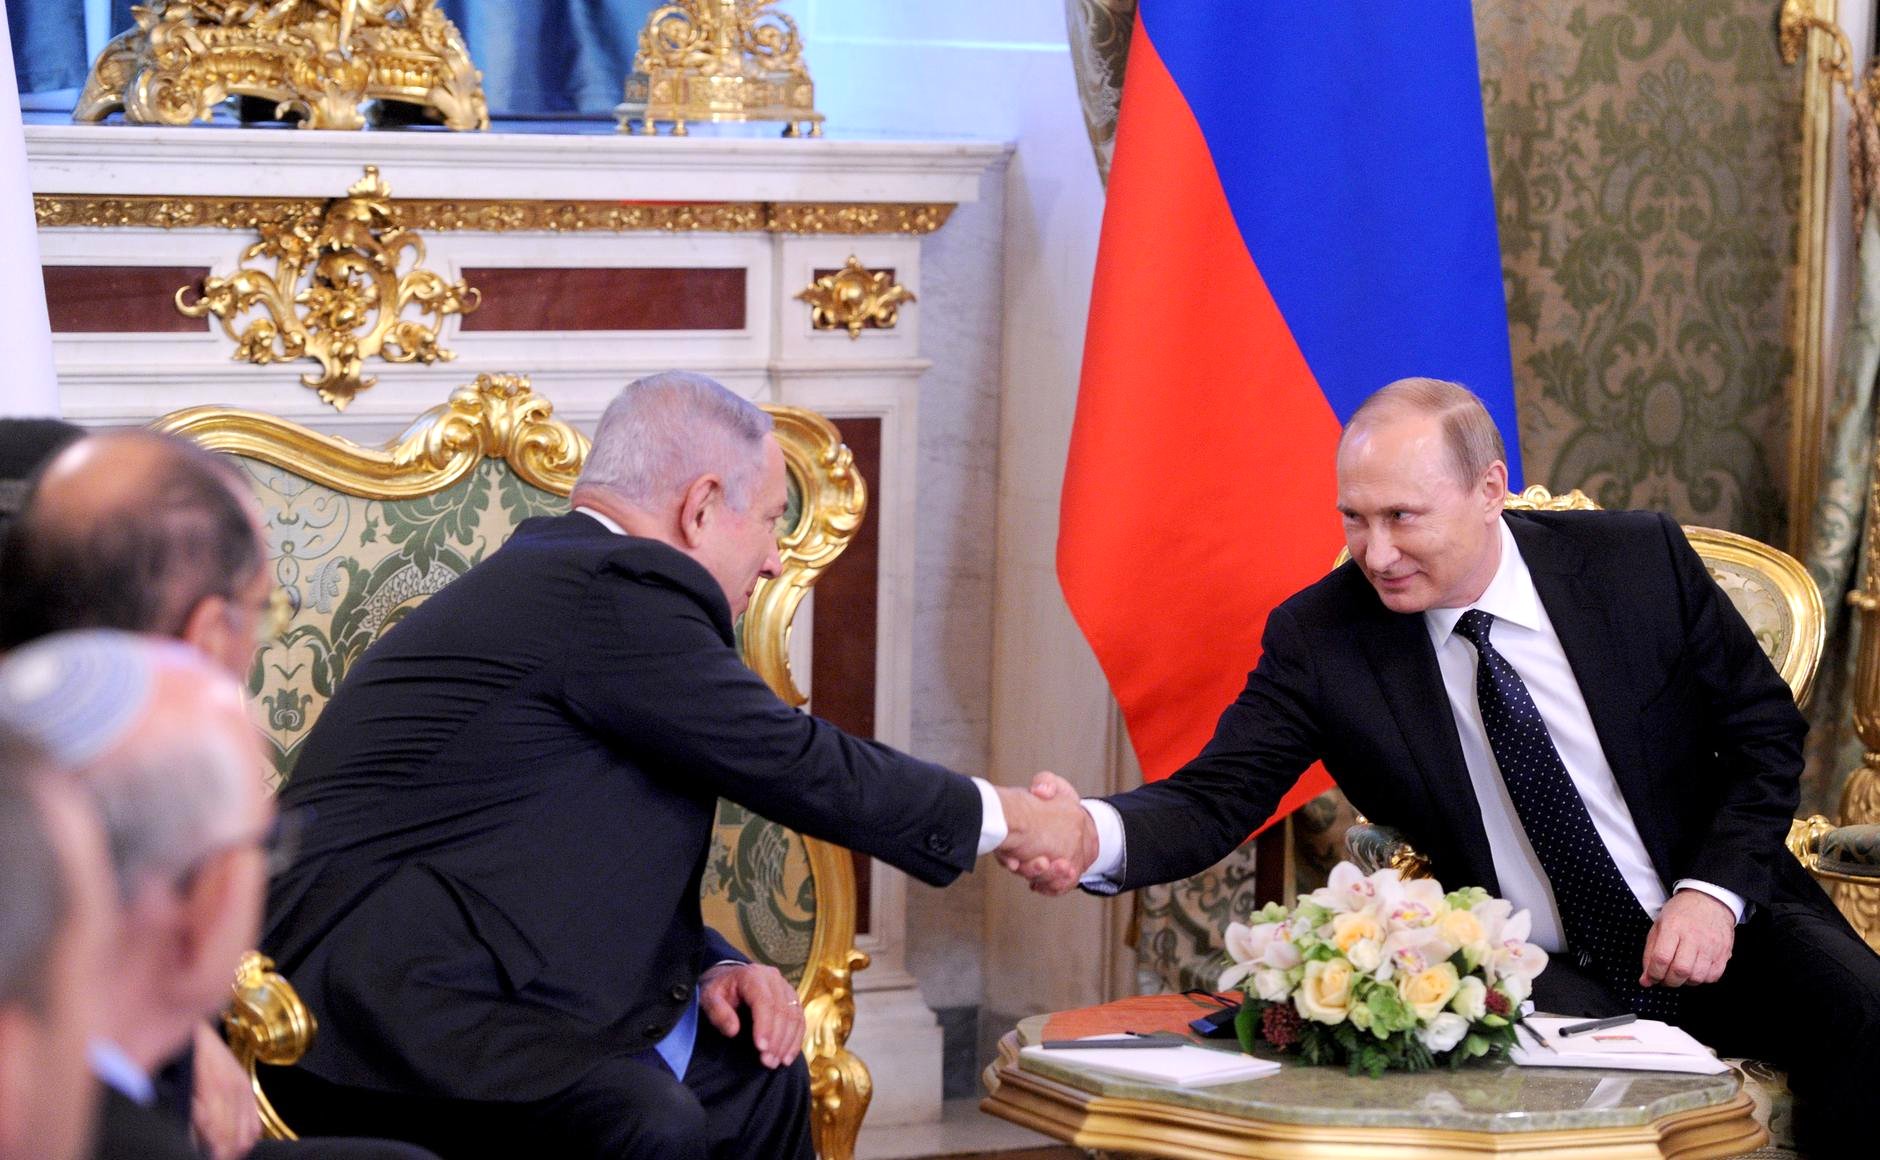  Putin: Israel among key countries determining situation in Middle East 